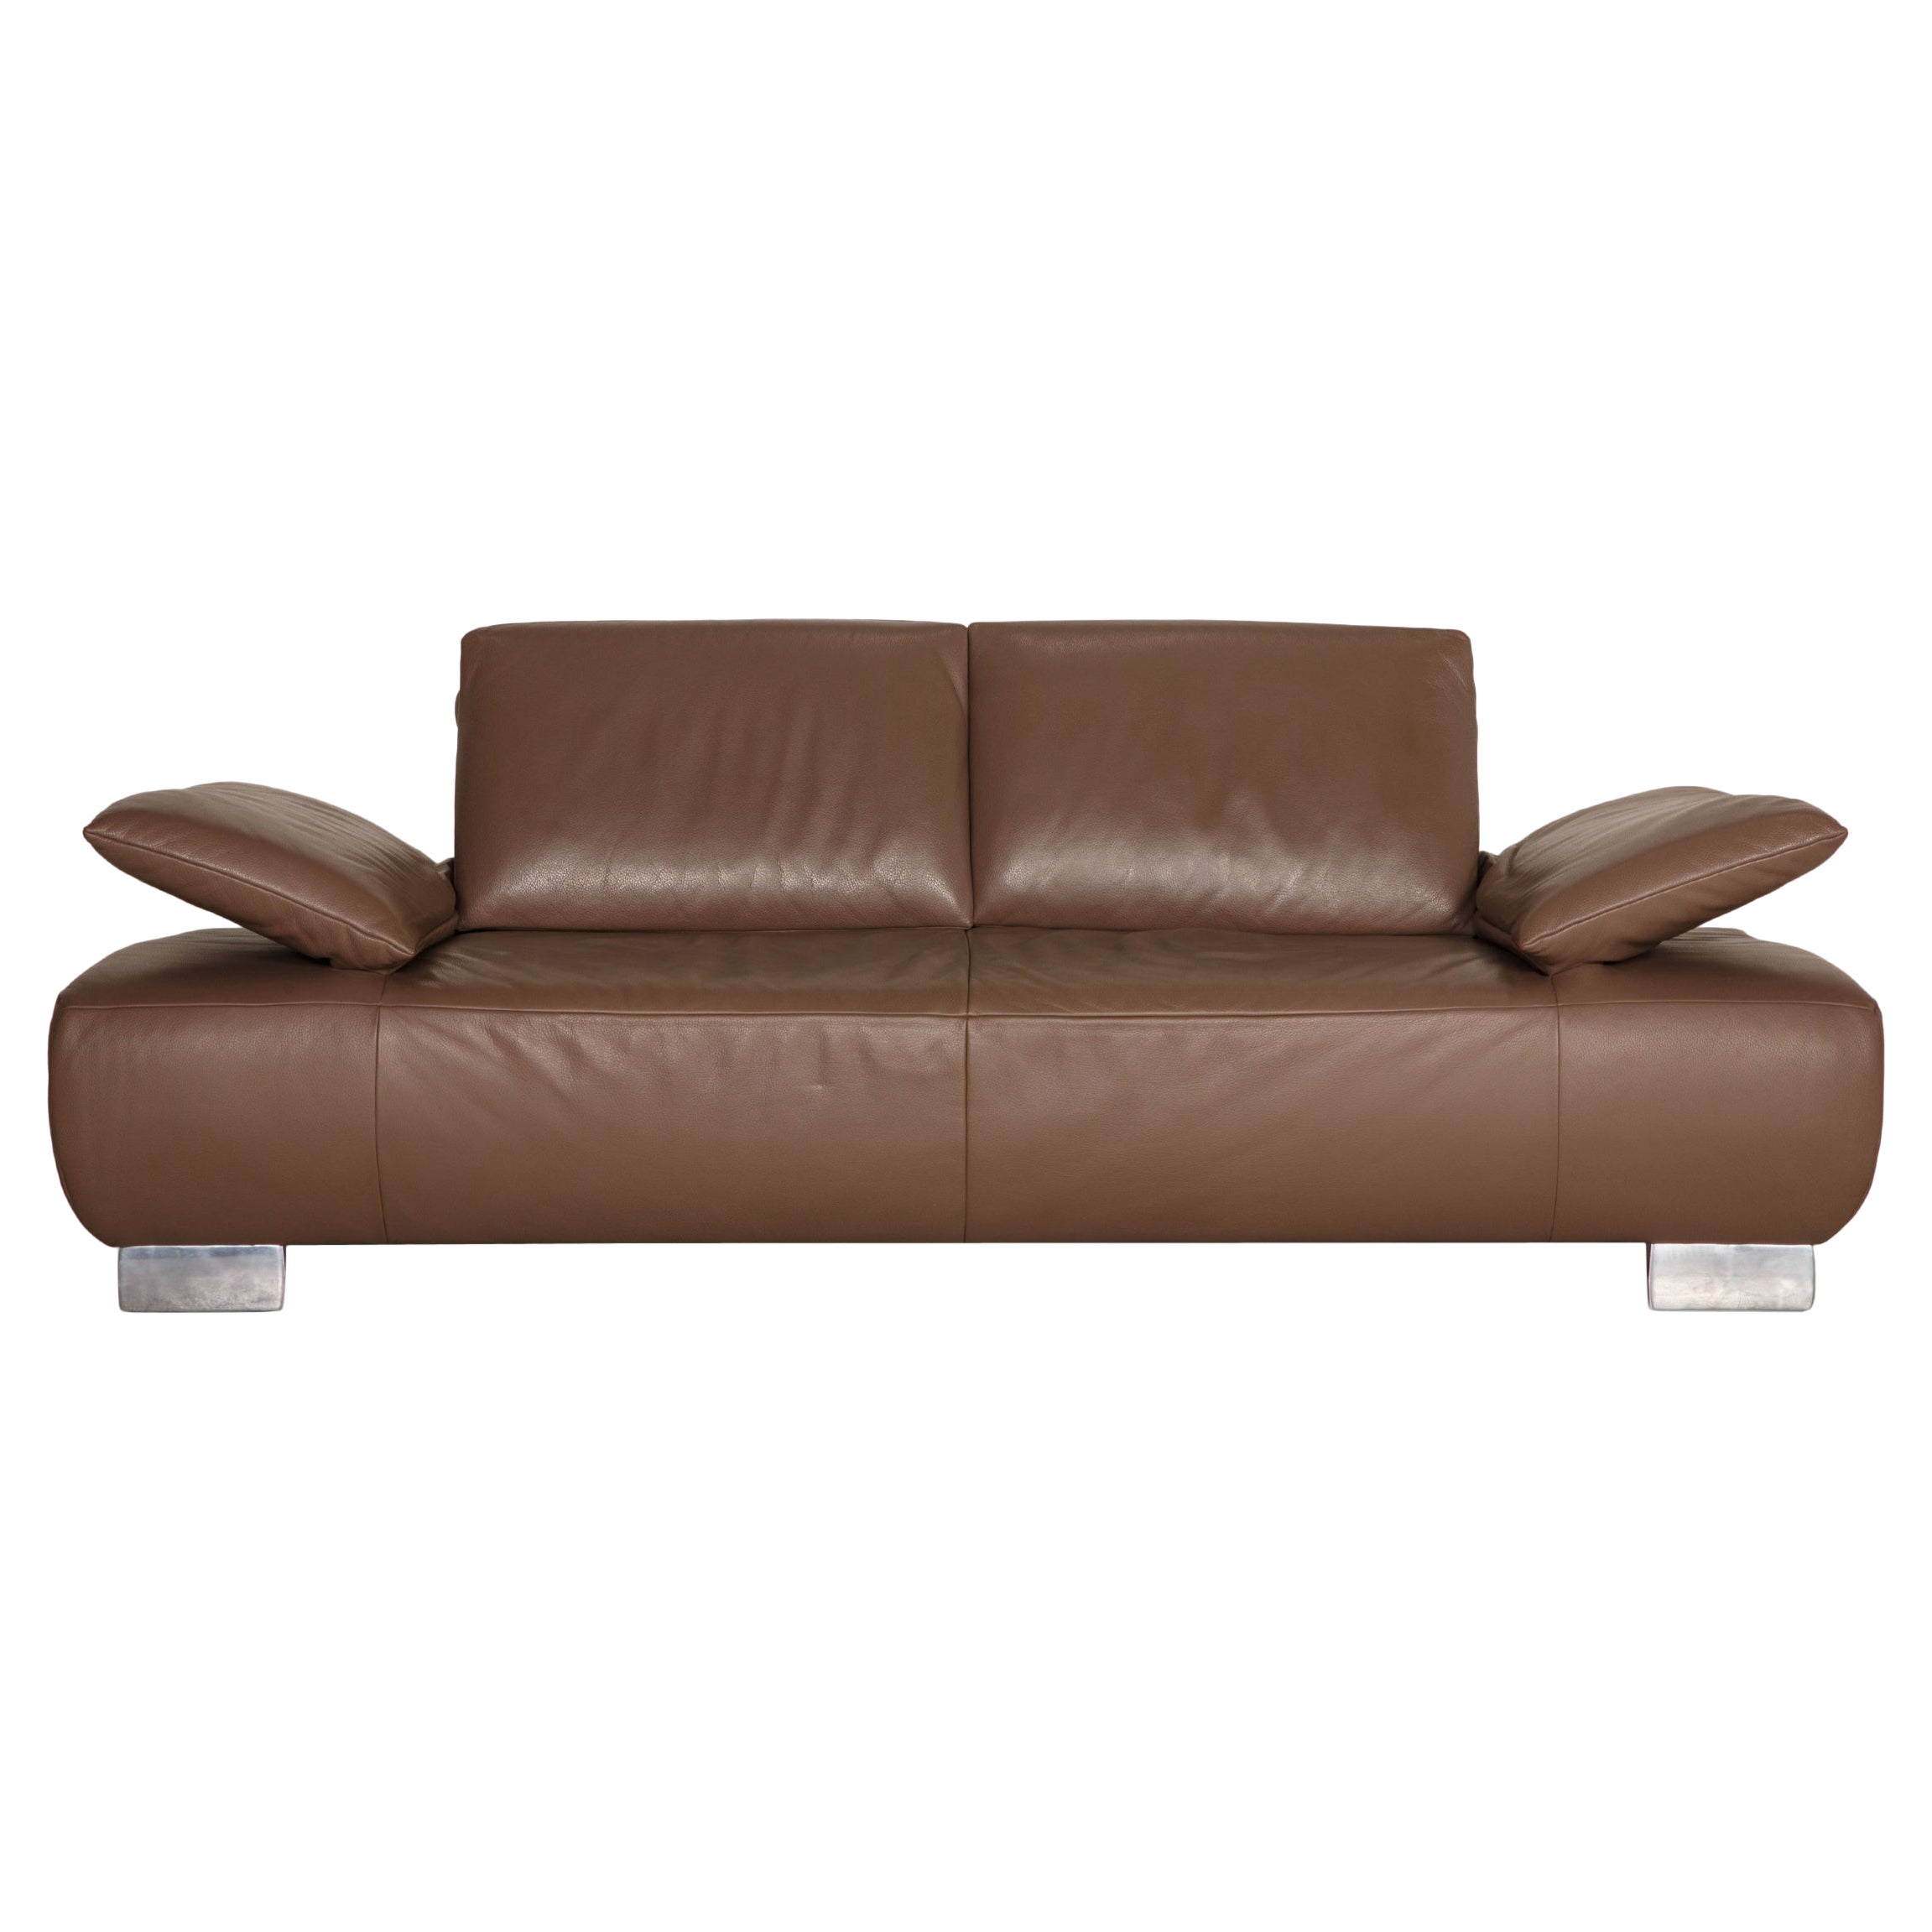 Koinor Volare Leather Sofa Brown Two Seater Couch For Sale